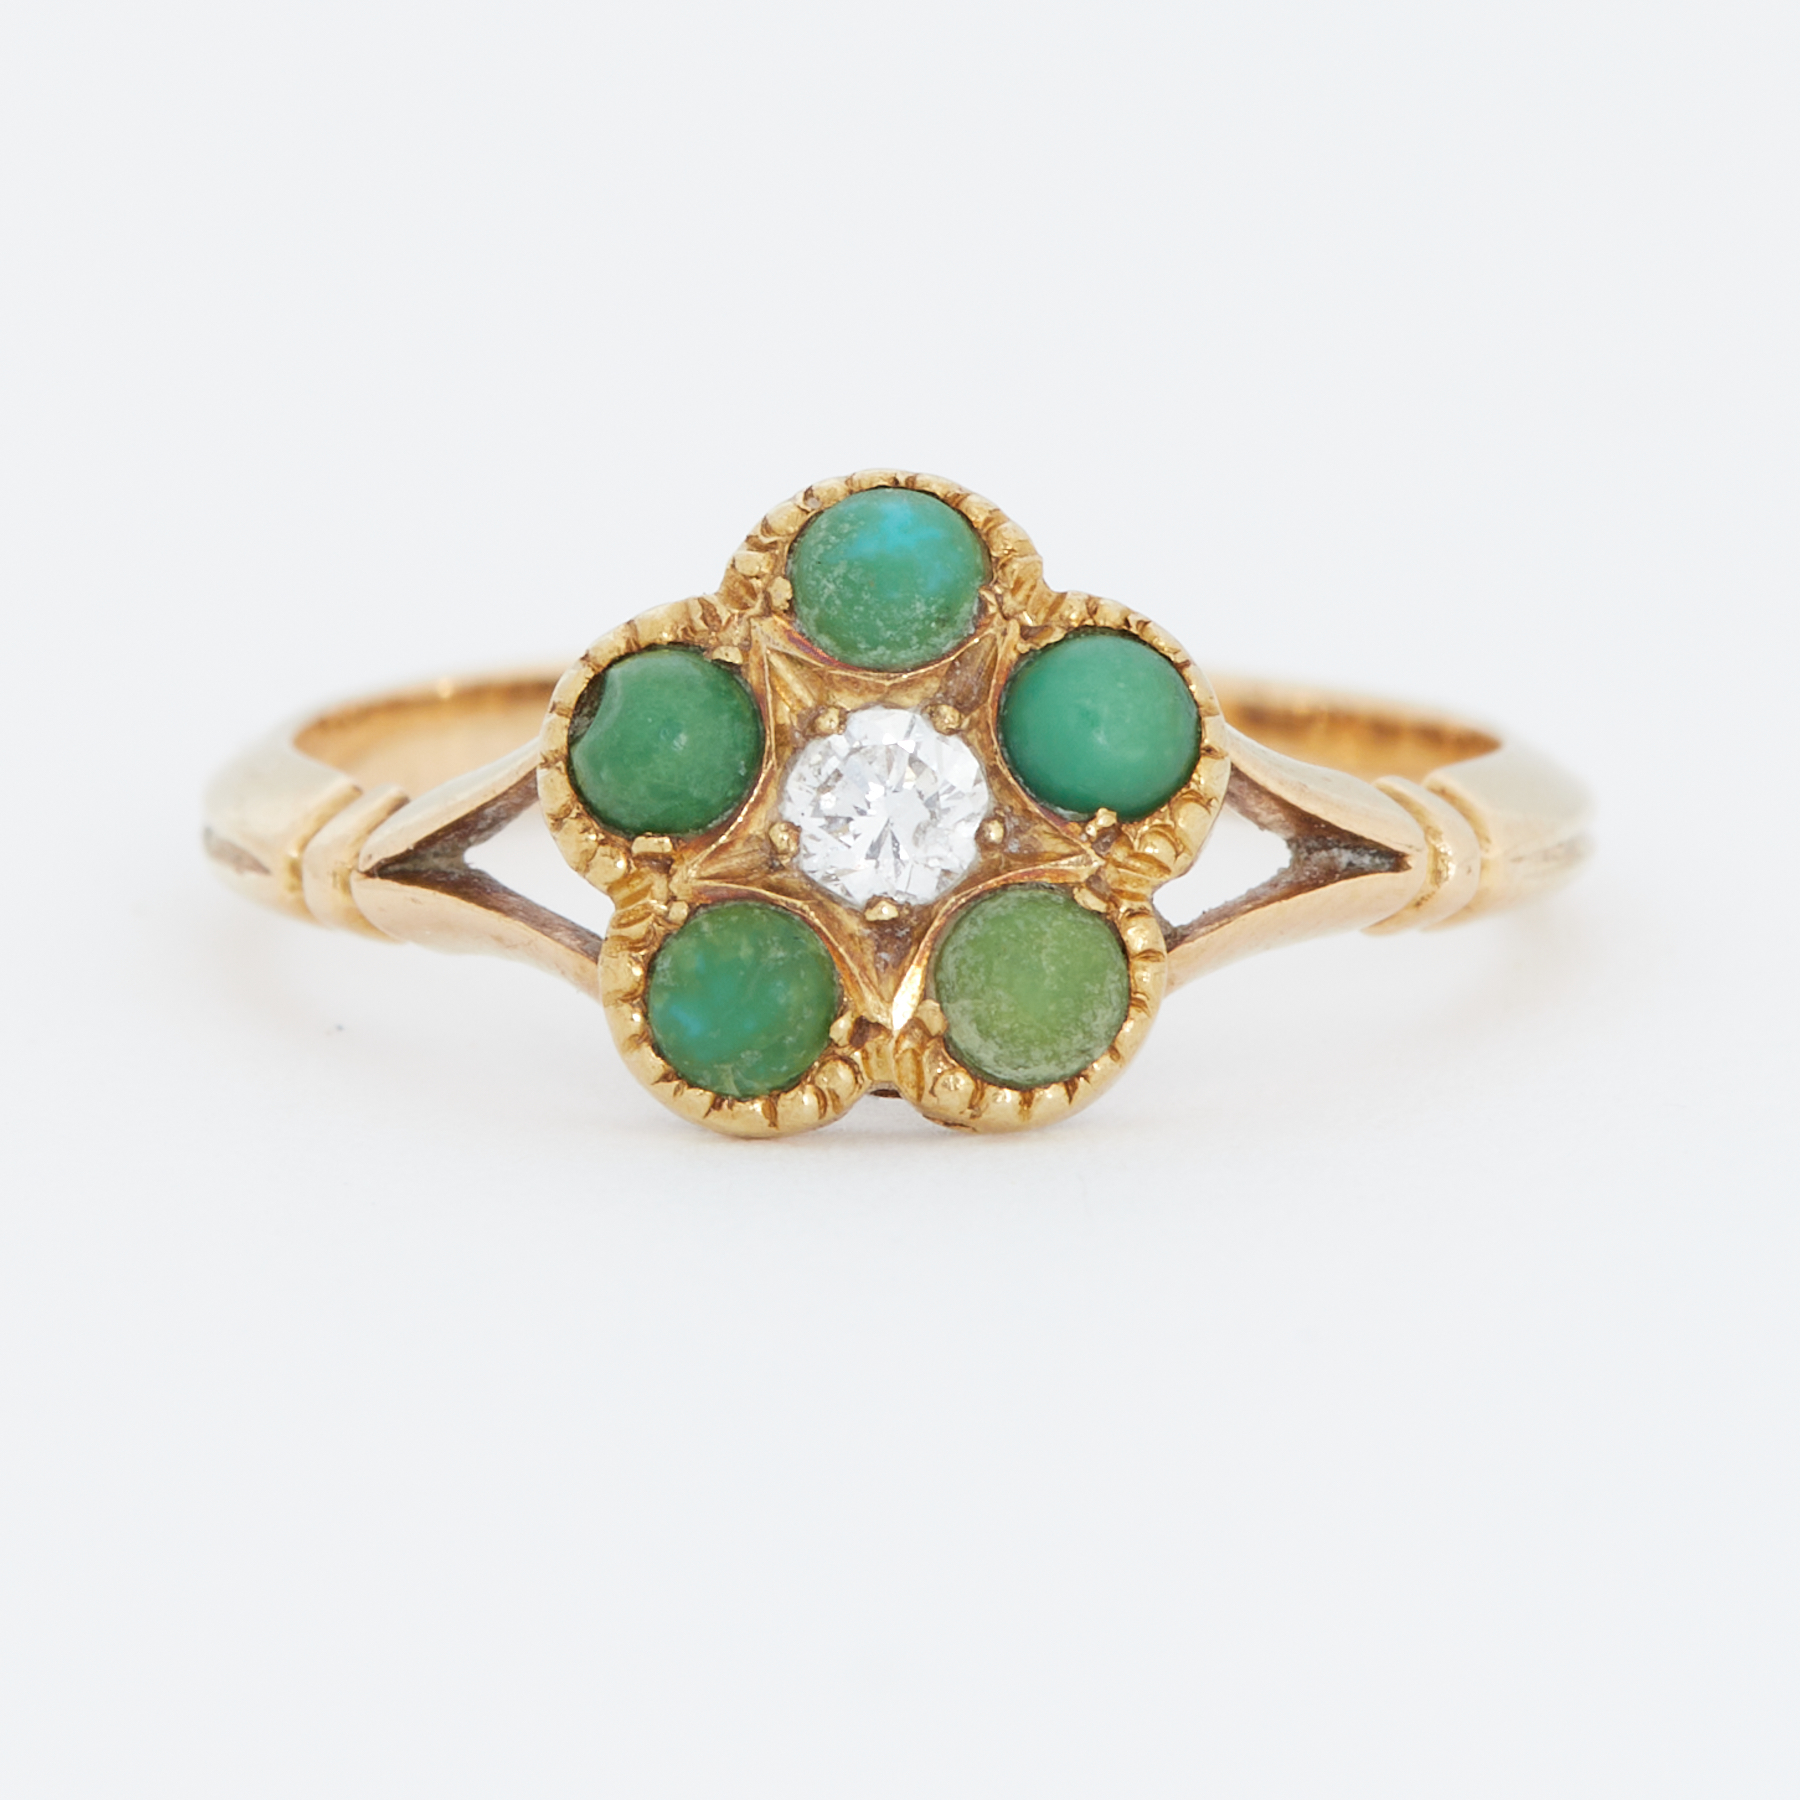 A yellow gold flower design ring set with a central old round cut diamond and surrounded by small